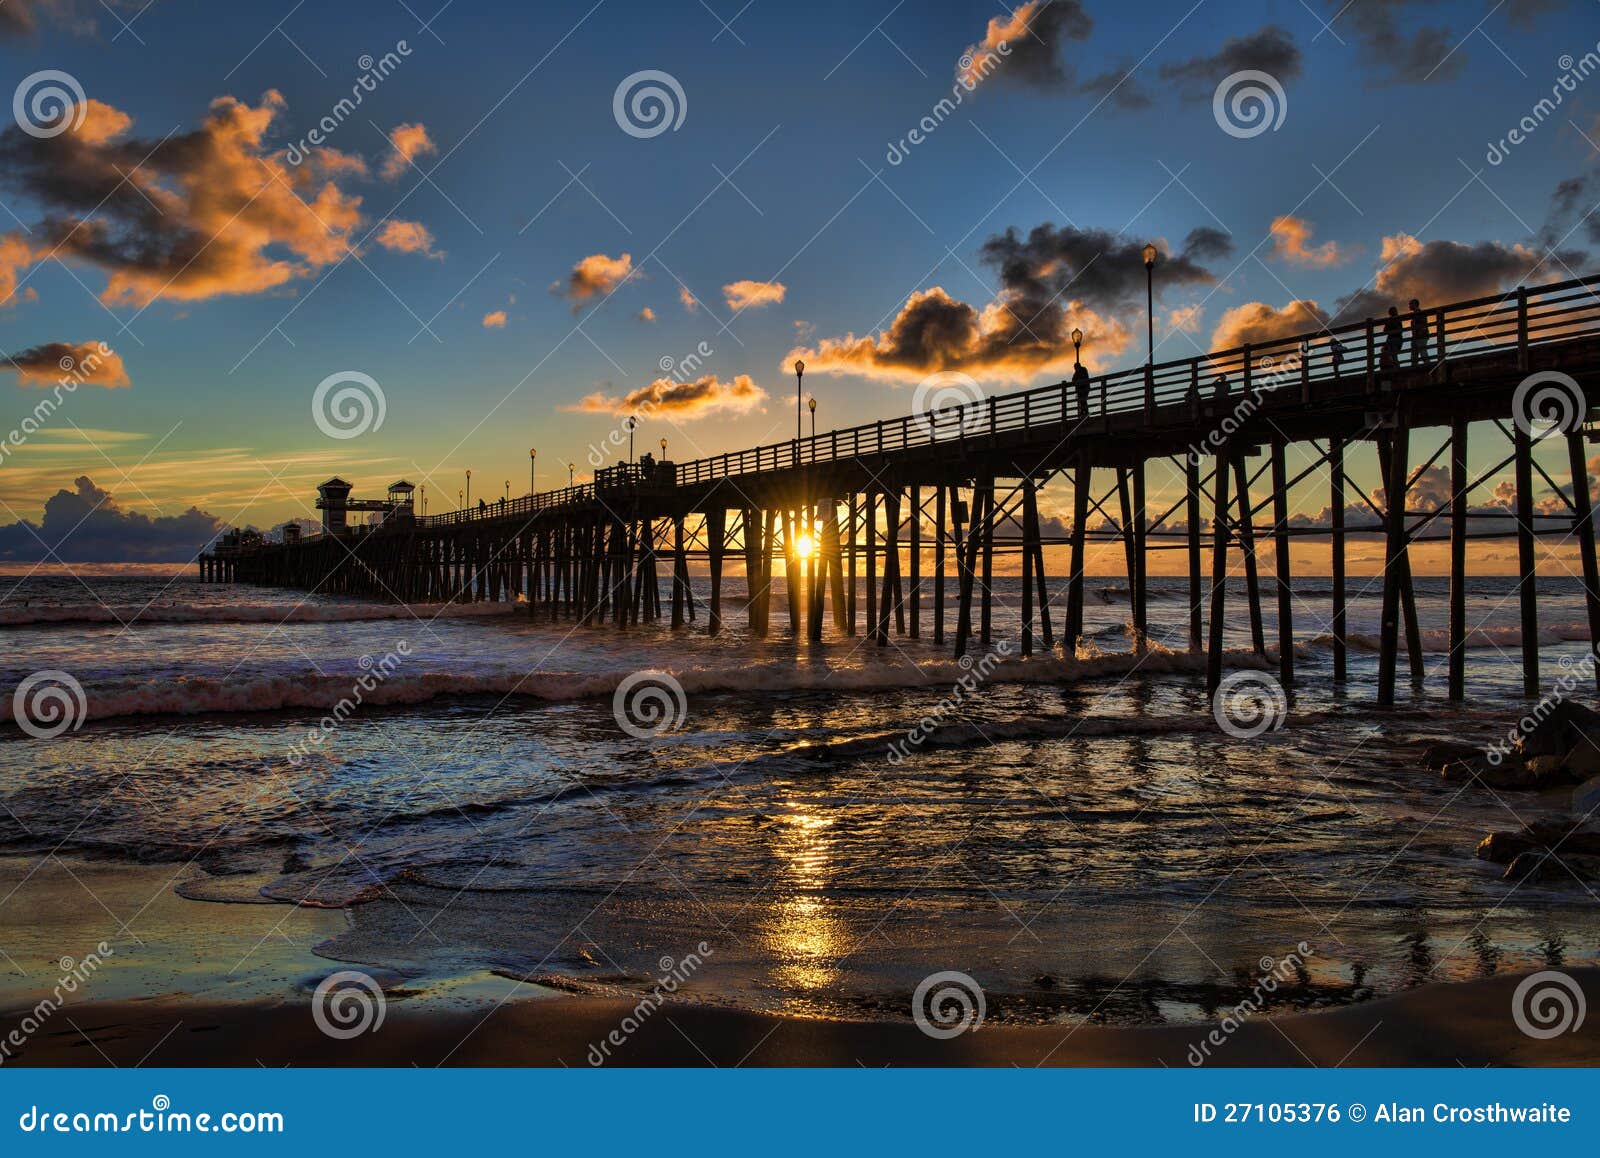 Sunset at the Oceanside Pier Stock Photo - Image of tourism